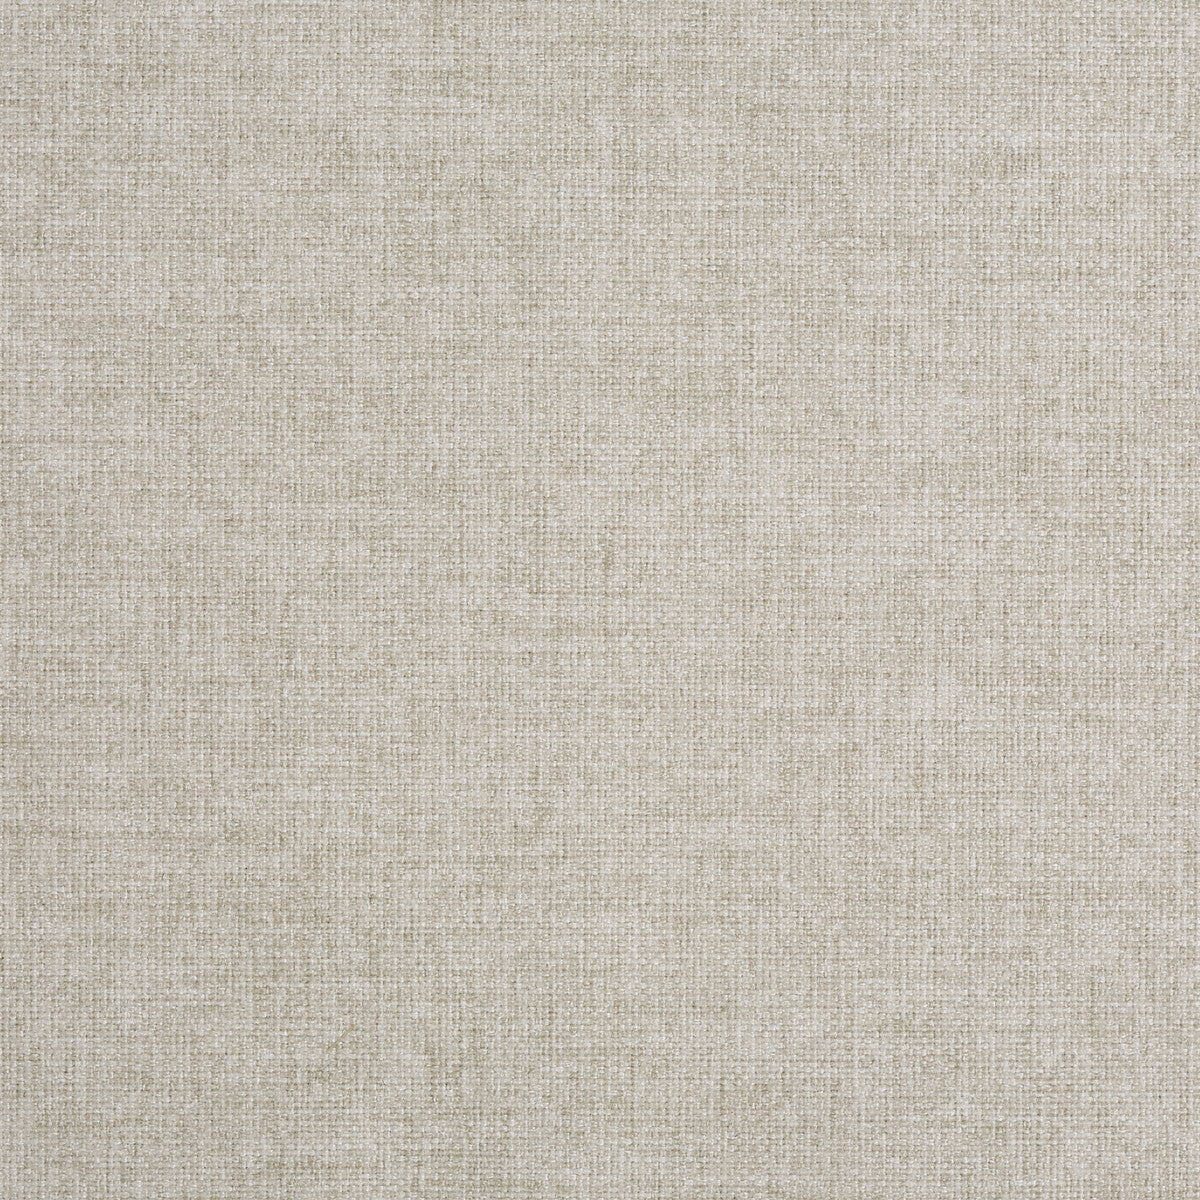 Kravet Contract fabric in 35122-111 color - pattern 35122.111.0 - by Kravet Contract in the Crypton Incase collection